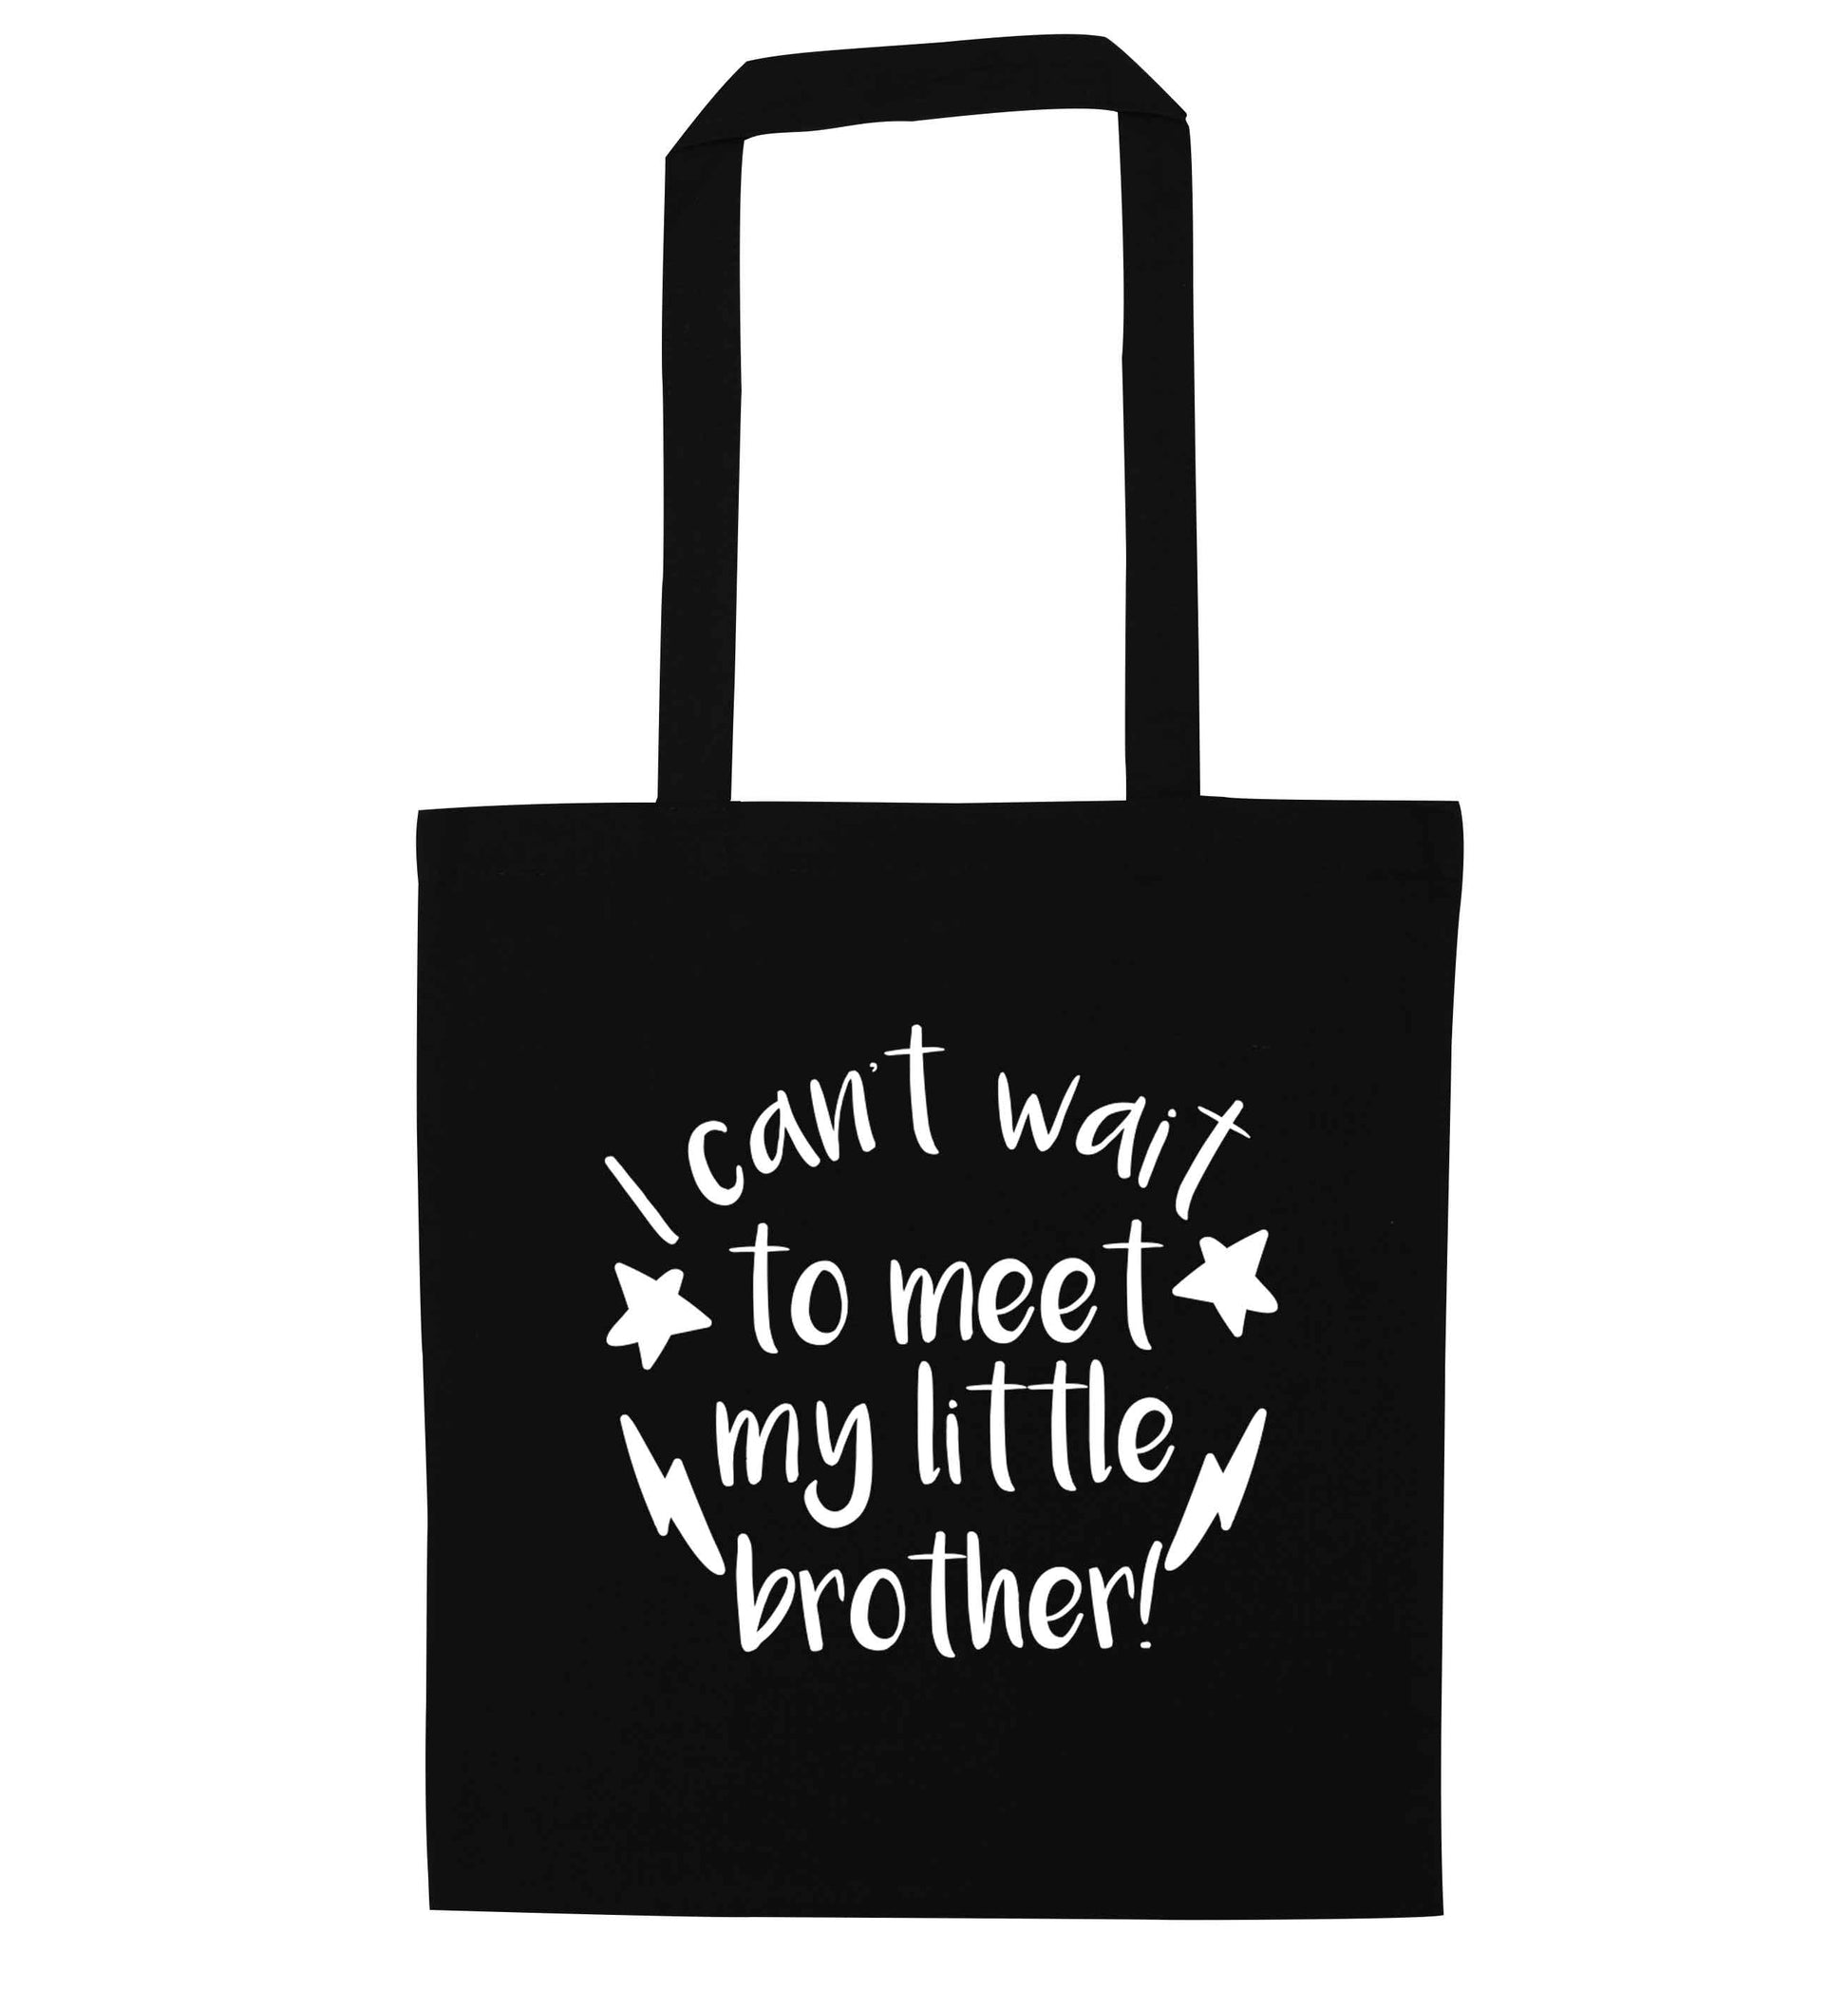 I can't wait to meet my sister! black tote bag